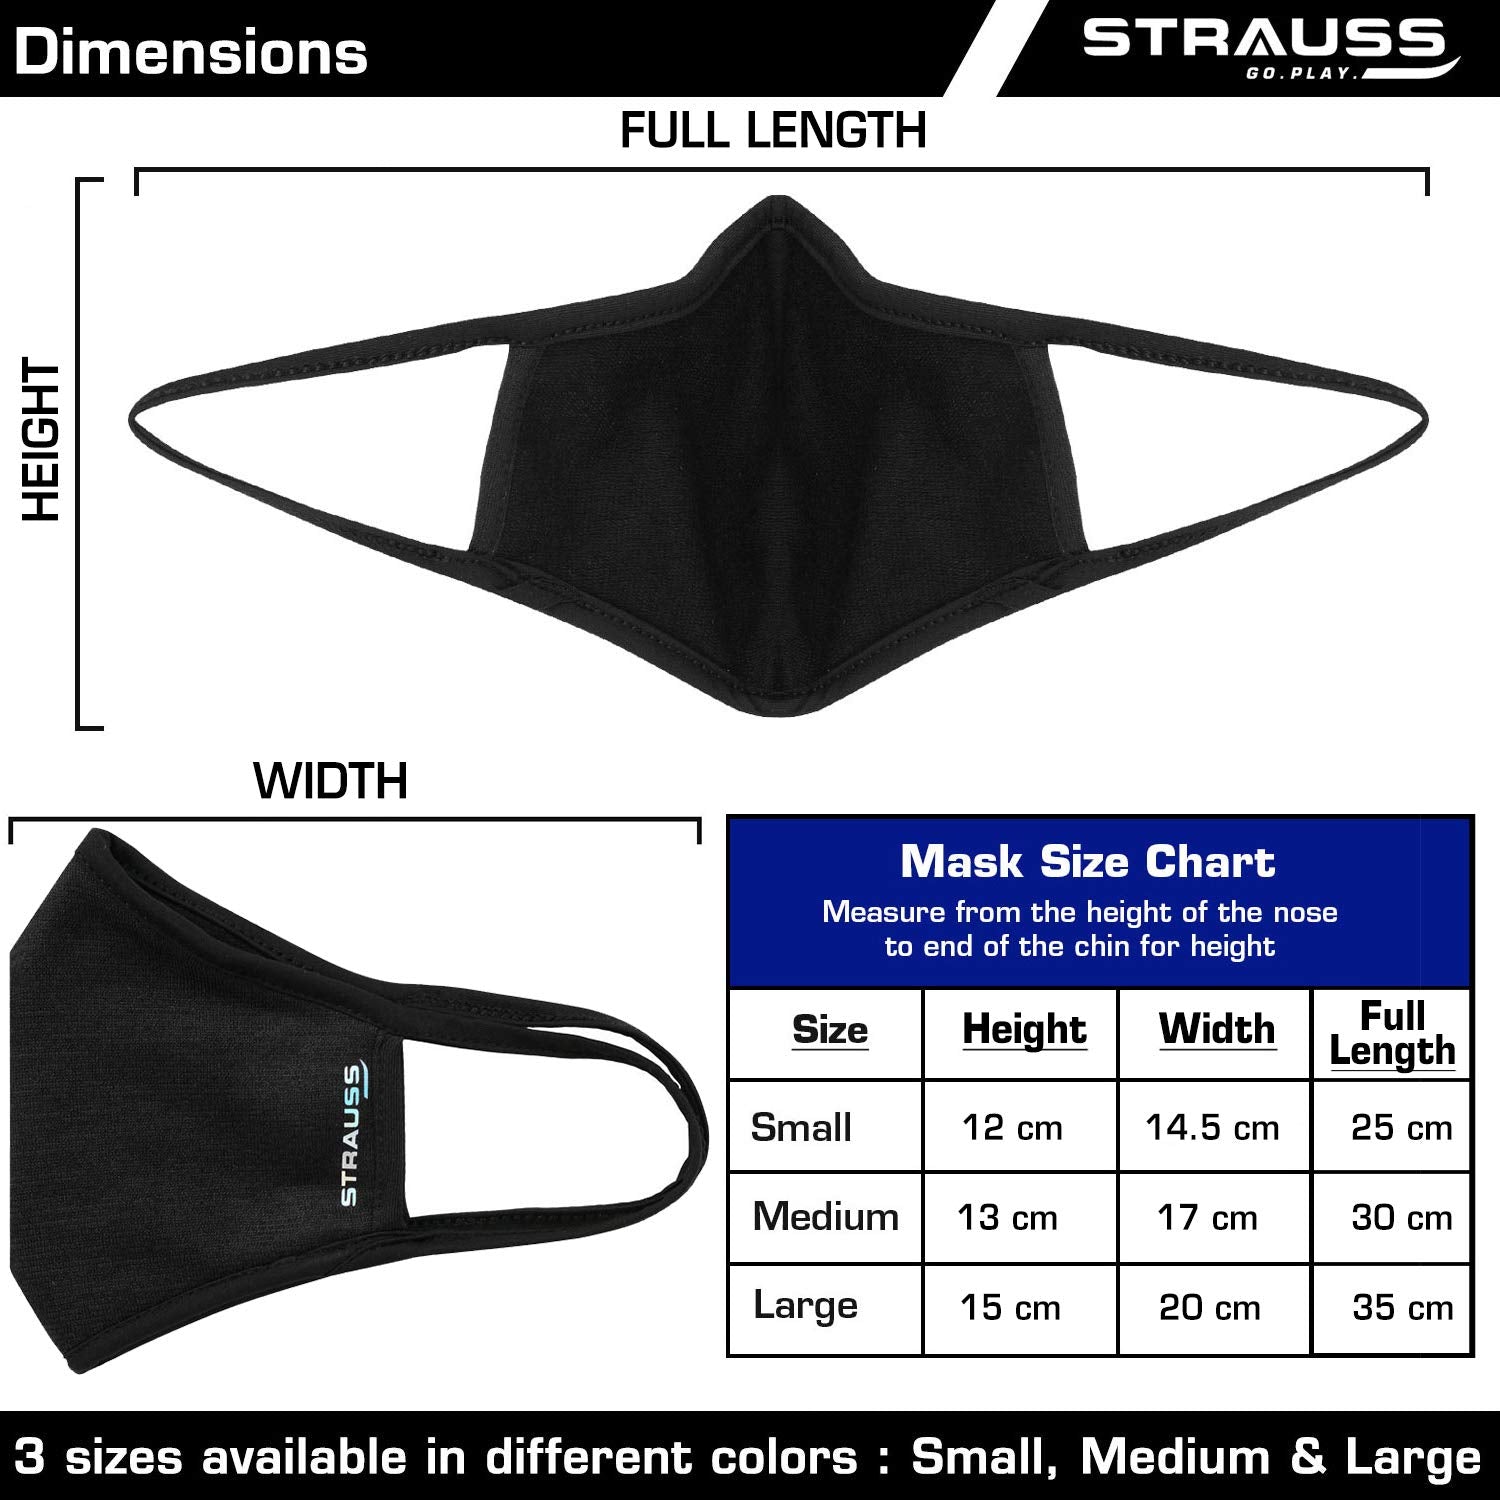 STRAUSS Unisex Anti-Bacterial Protection Mask, Black Vent, Large, (Black)